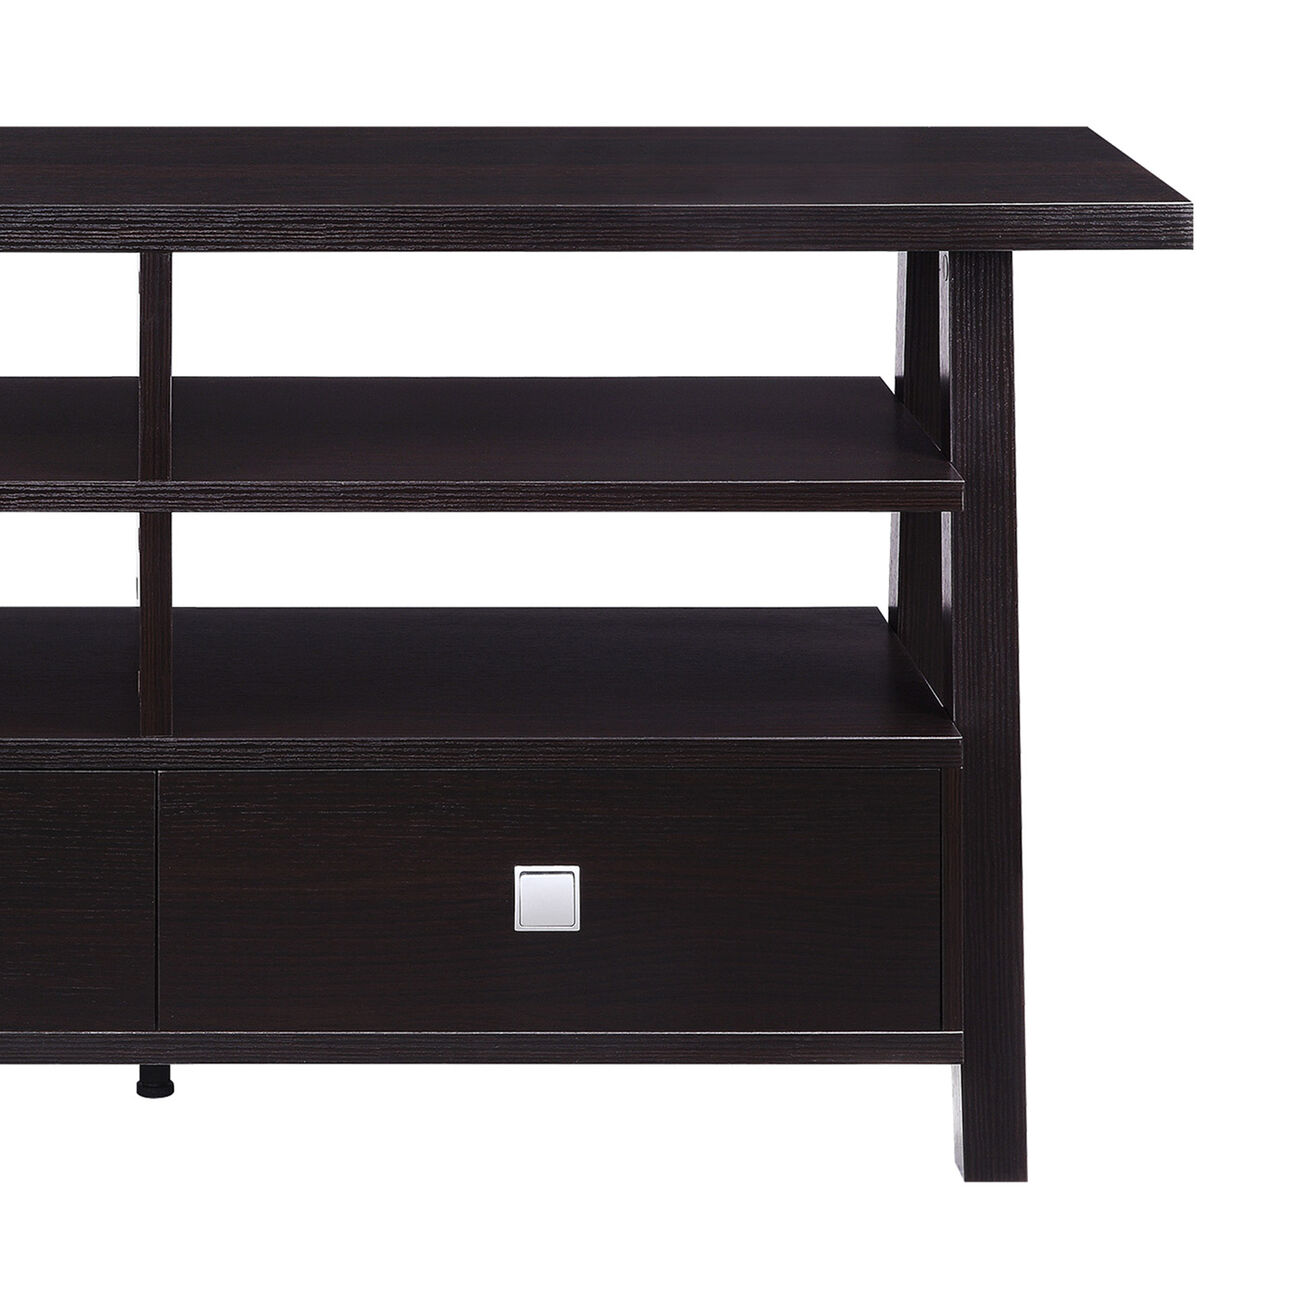 Transitional Wooden TV Stand with 4 Open Shelves and 2 Drawers, Brown - BM215271